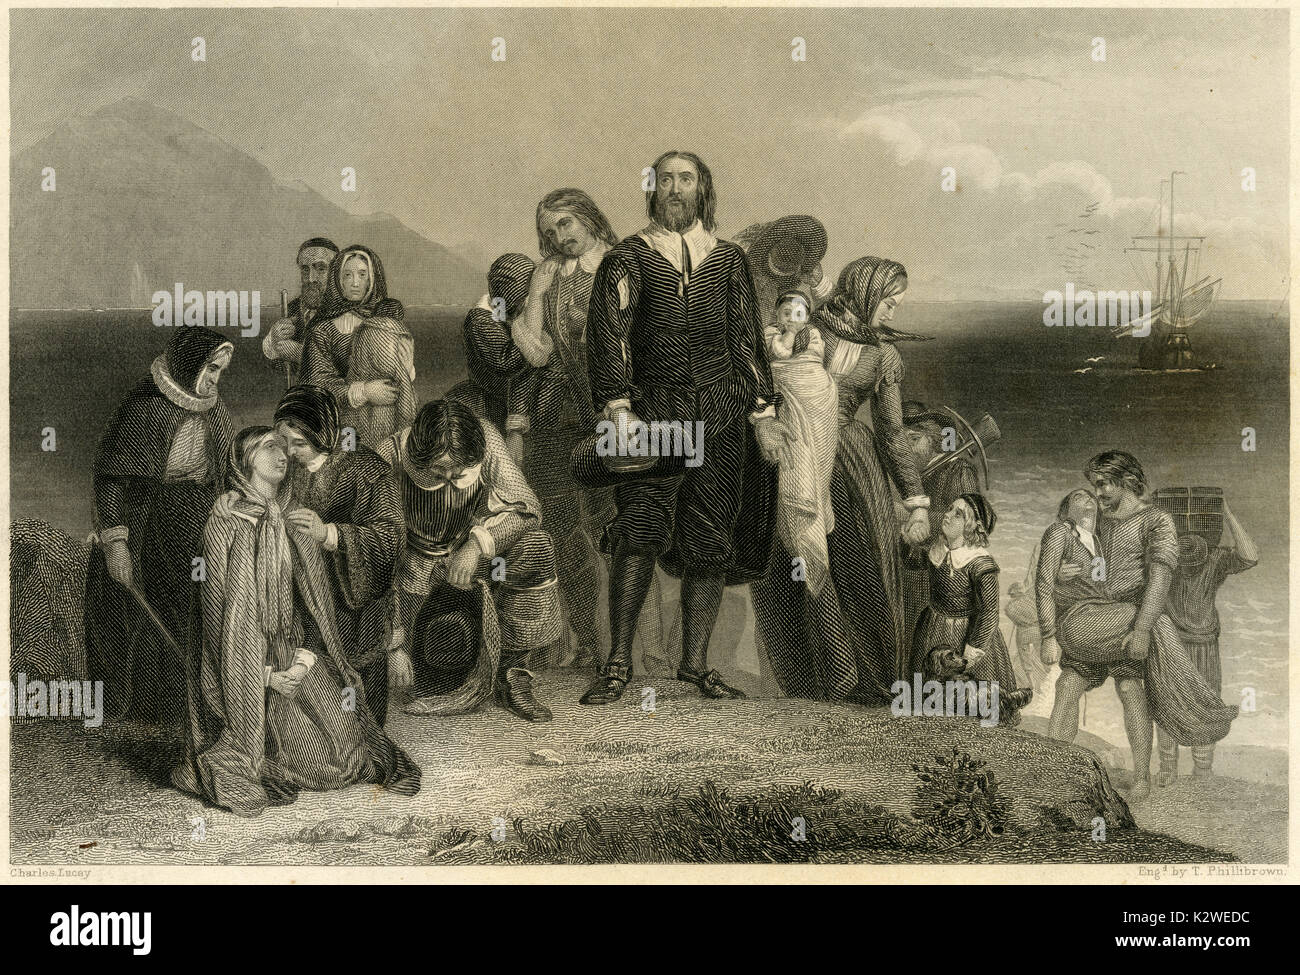 Antique 1856 engraving from 'Landing of the Pilgrim Fathers' by Charles Lucy (1814-1873). SOURCE: ORIGINAL STEEL ENGRAVING. Stock Photo